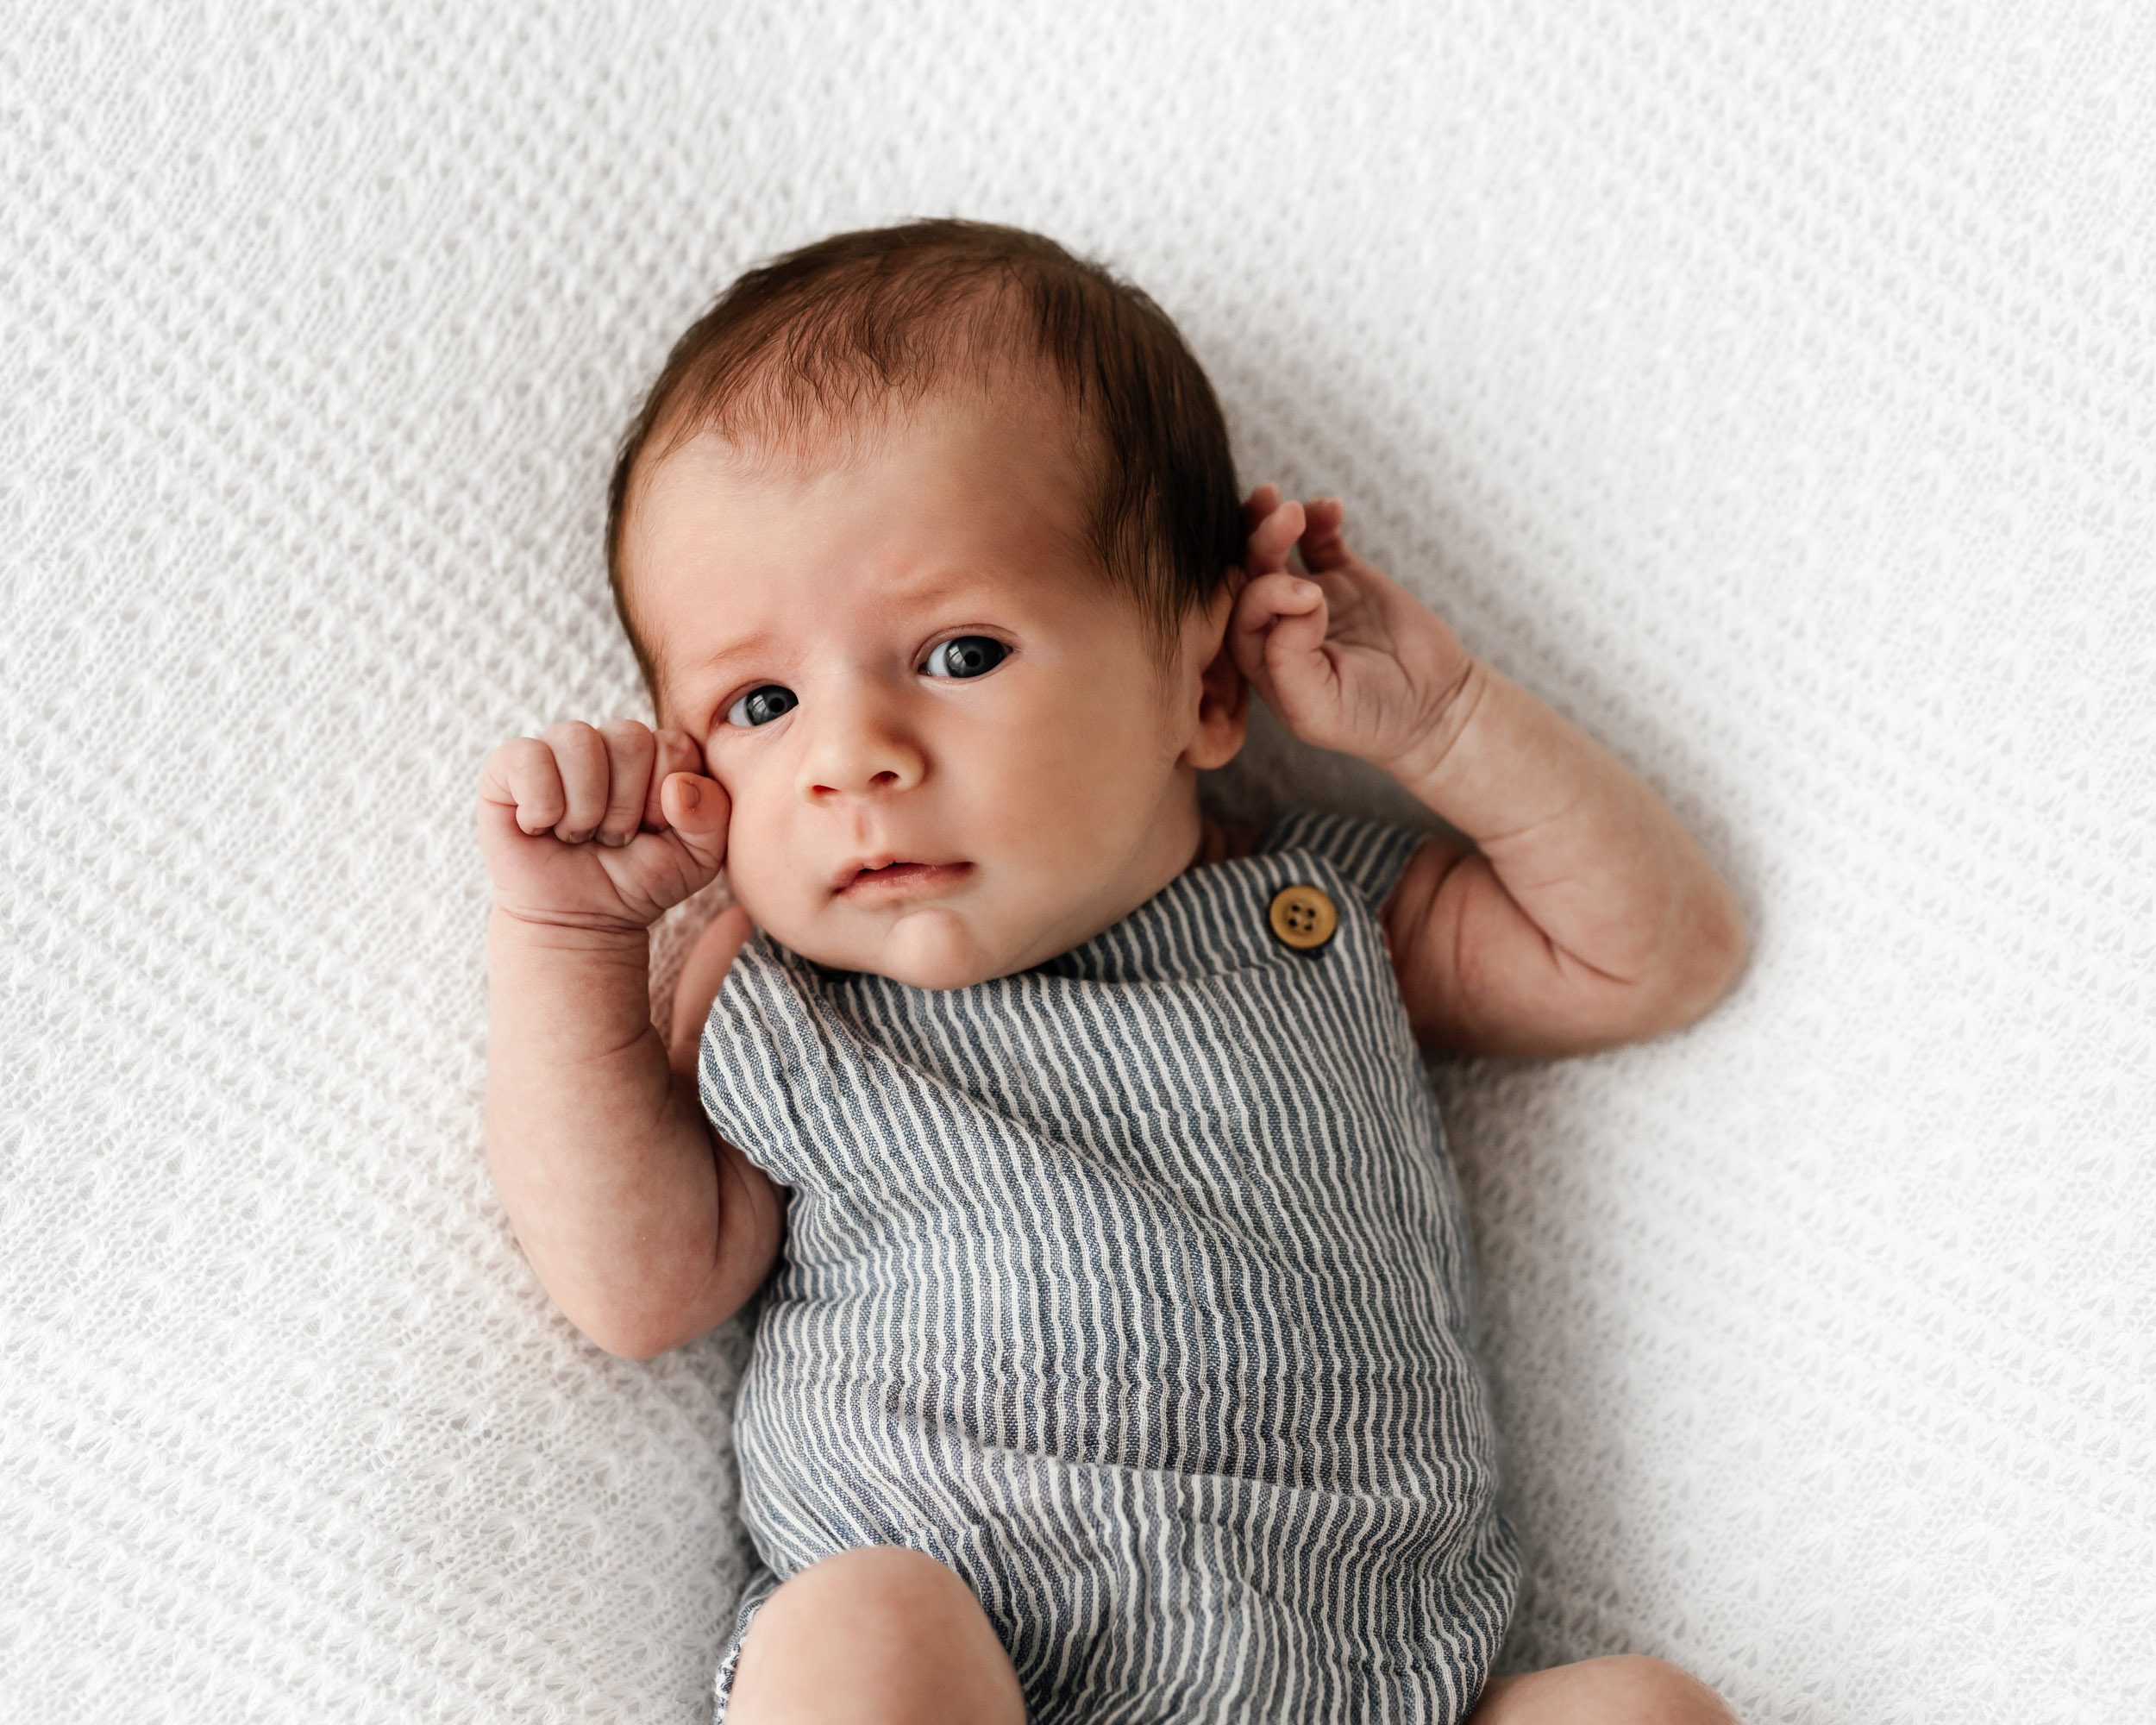 a baby boy laying on a white textured backdrop and holding his hands up to his face while he looks intently at the camera during a newborn photoshoot